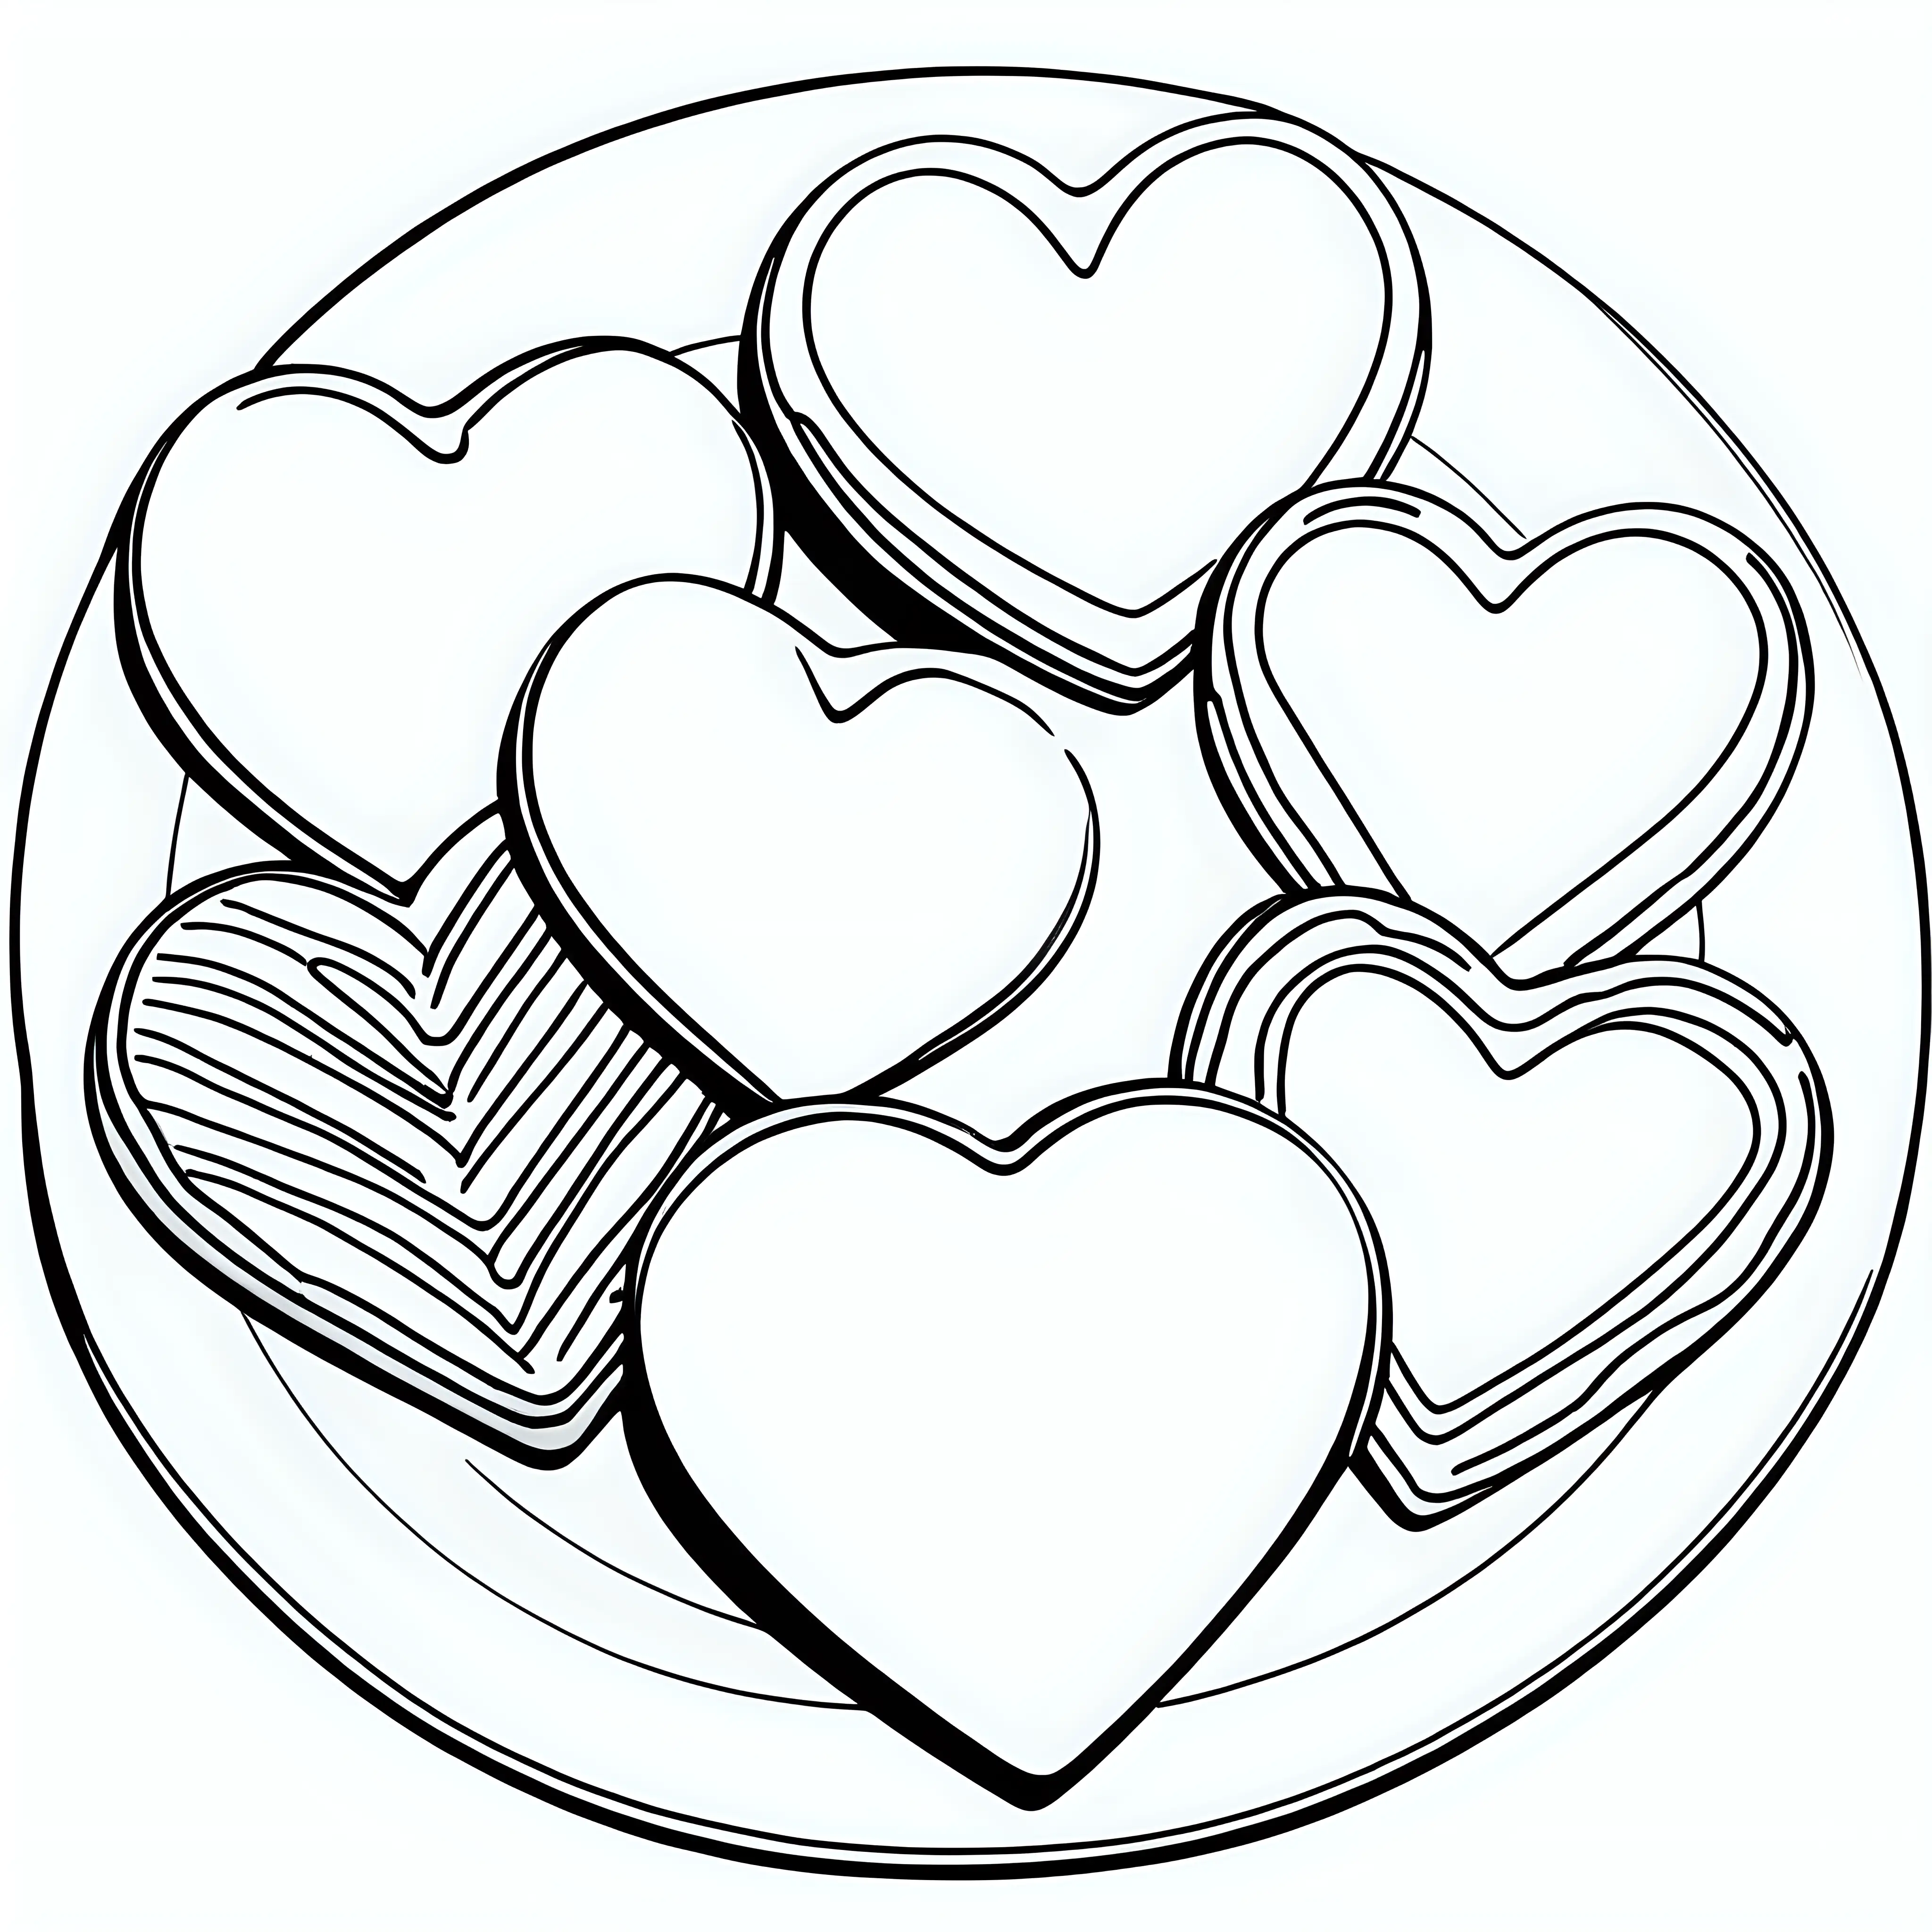 Heart-Shaped Cookies: A plate of heart-shaped cookies ready to be decorated for a coloring book with crisp lines and white background. Make it an easy-to-color design for children. --ar 17:22